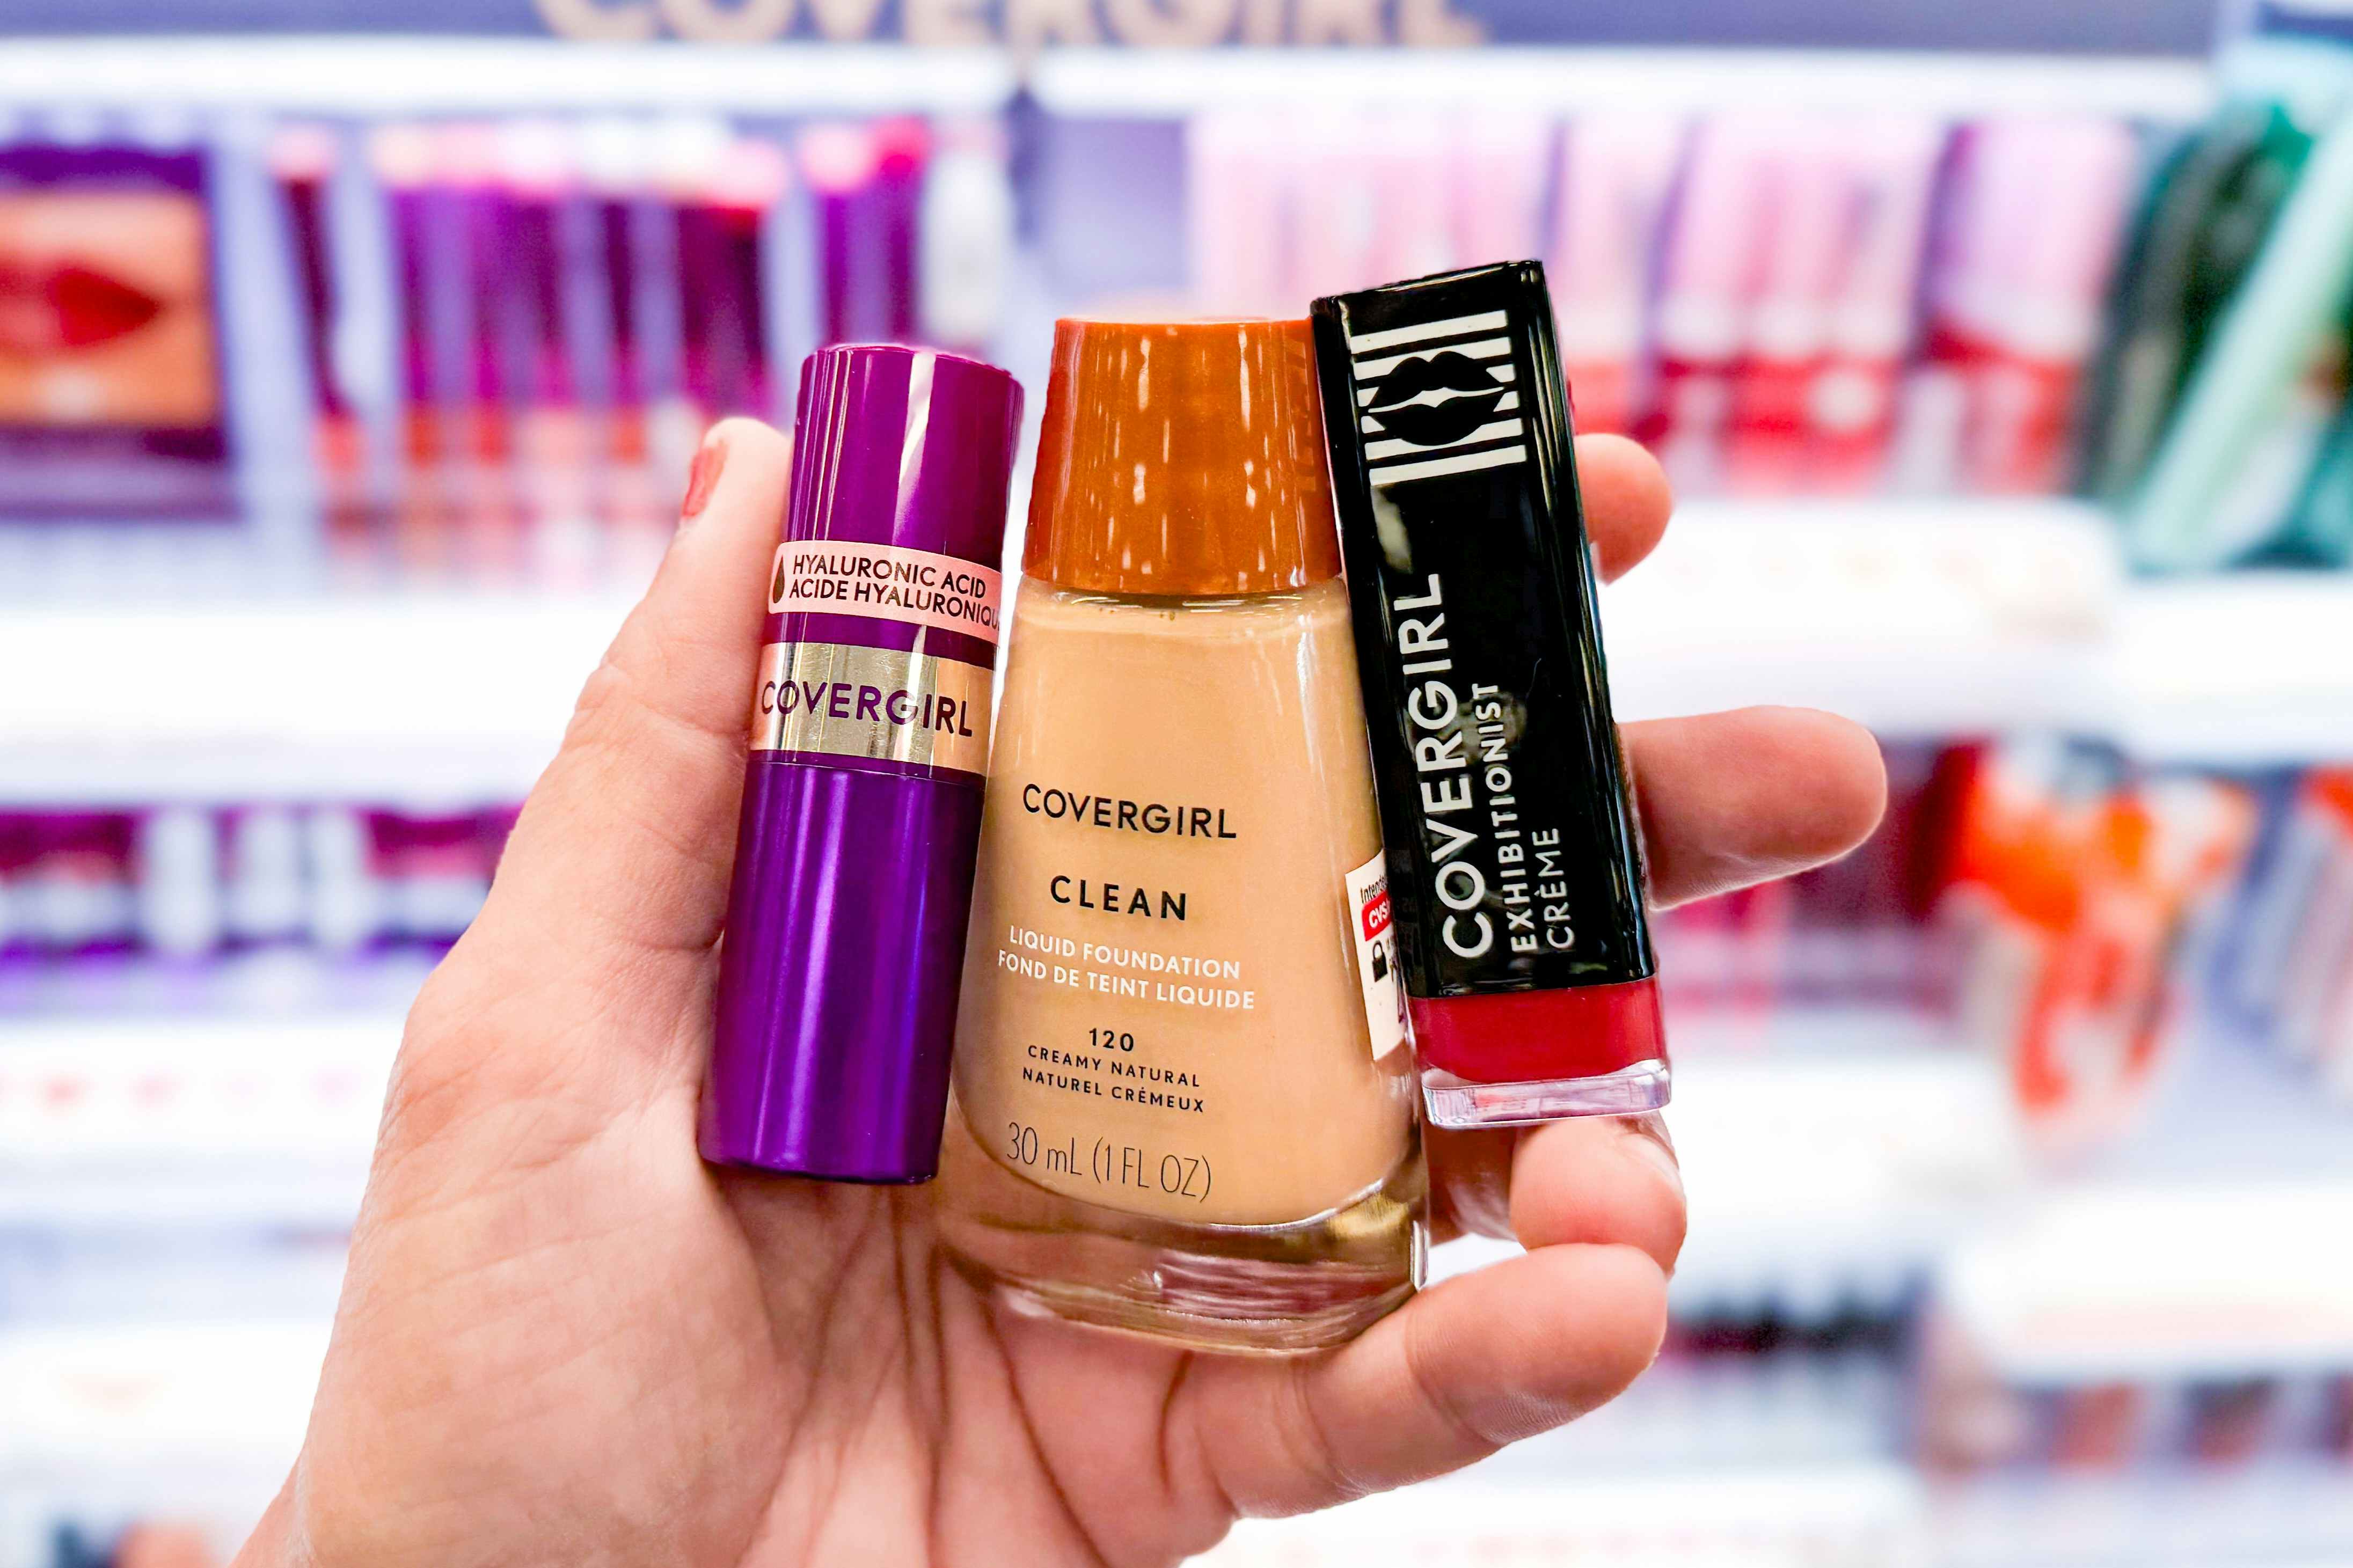 Pay $1 or Less for Covergirl Makeup at CVS — Online Deal